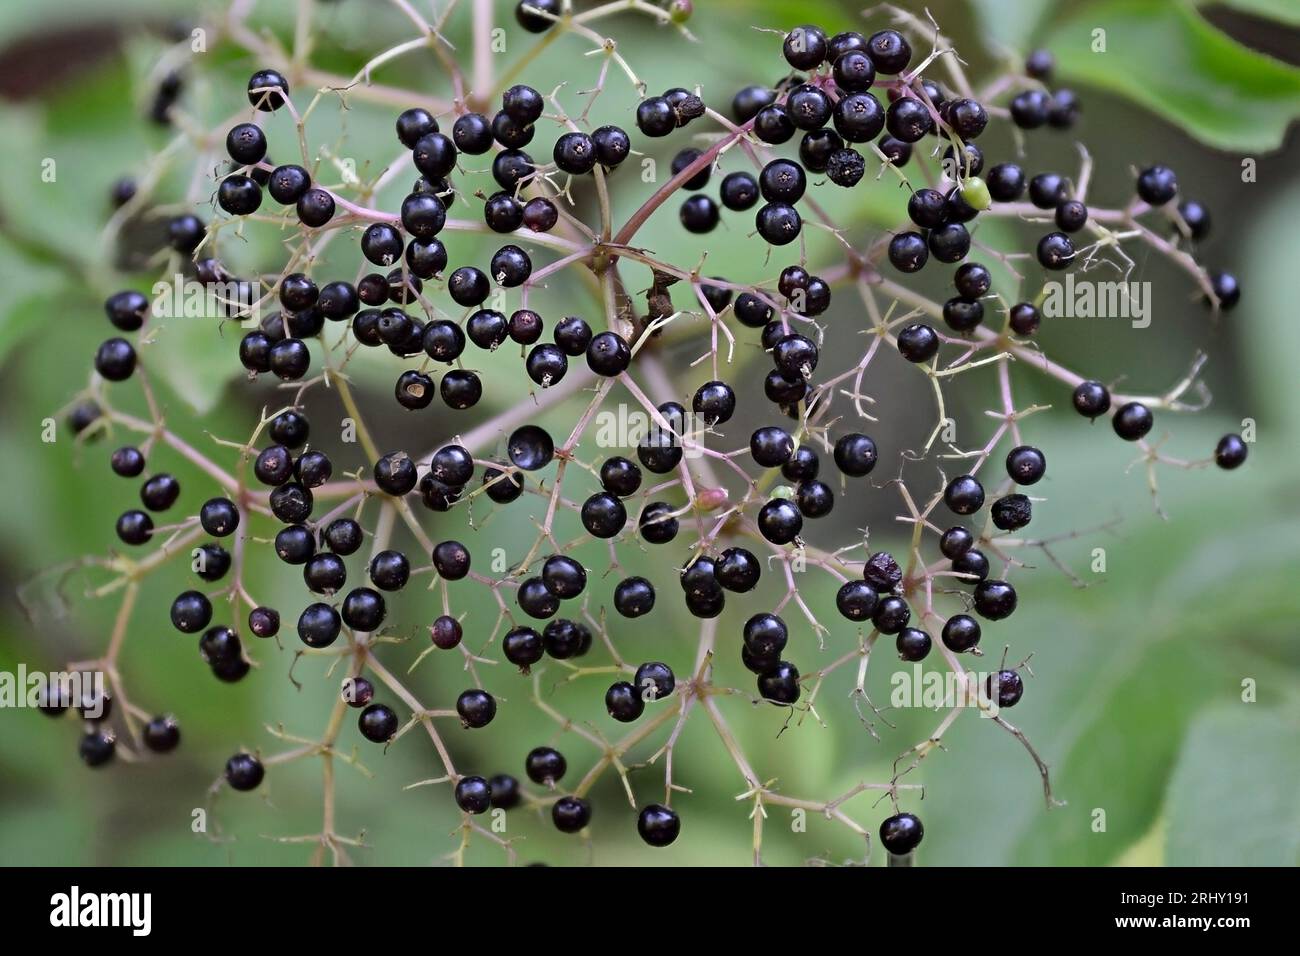 Cluster of wild black elderberry berries (sambucus canadensis) in the woods during late summer.  Abstract view. Stock Photo